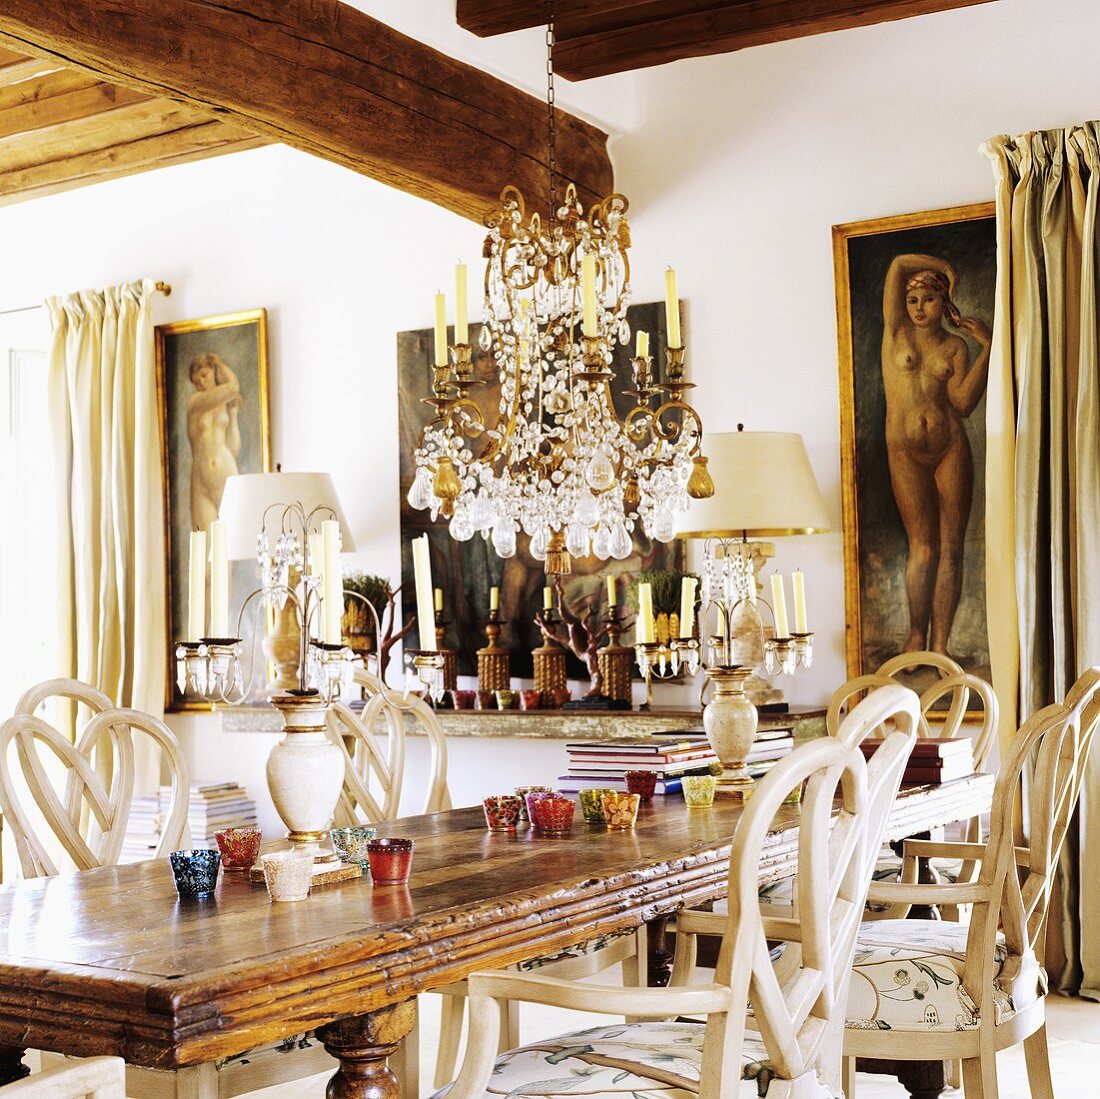 A rustic dining table with a chandelier hanging from the wood beam ceiling